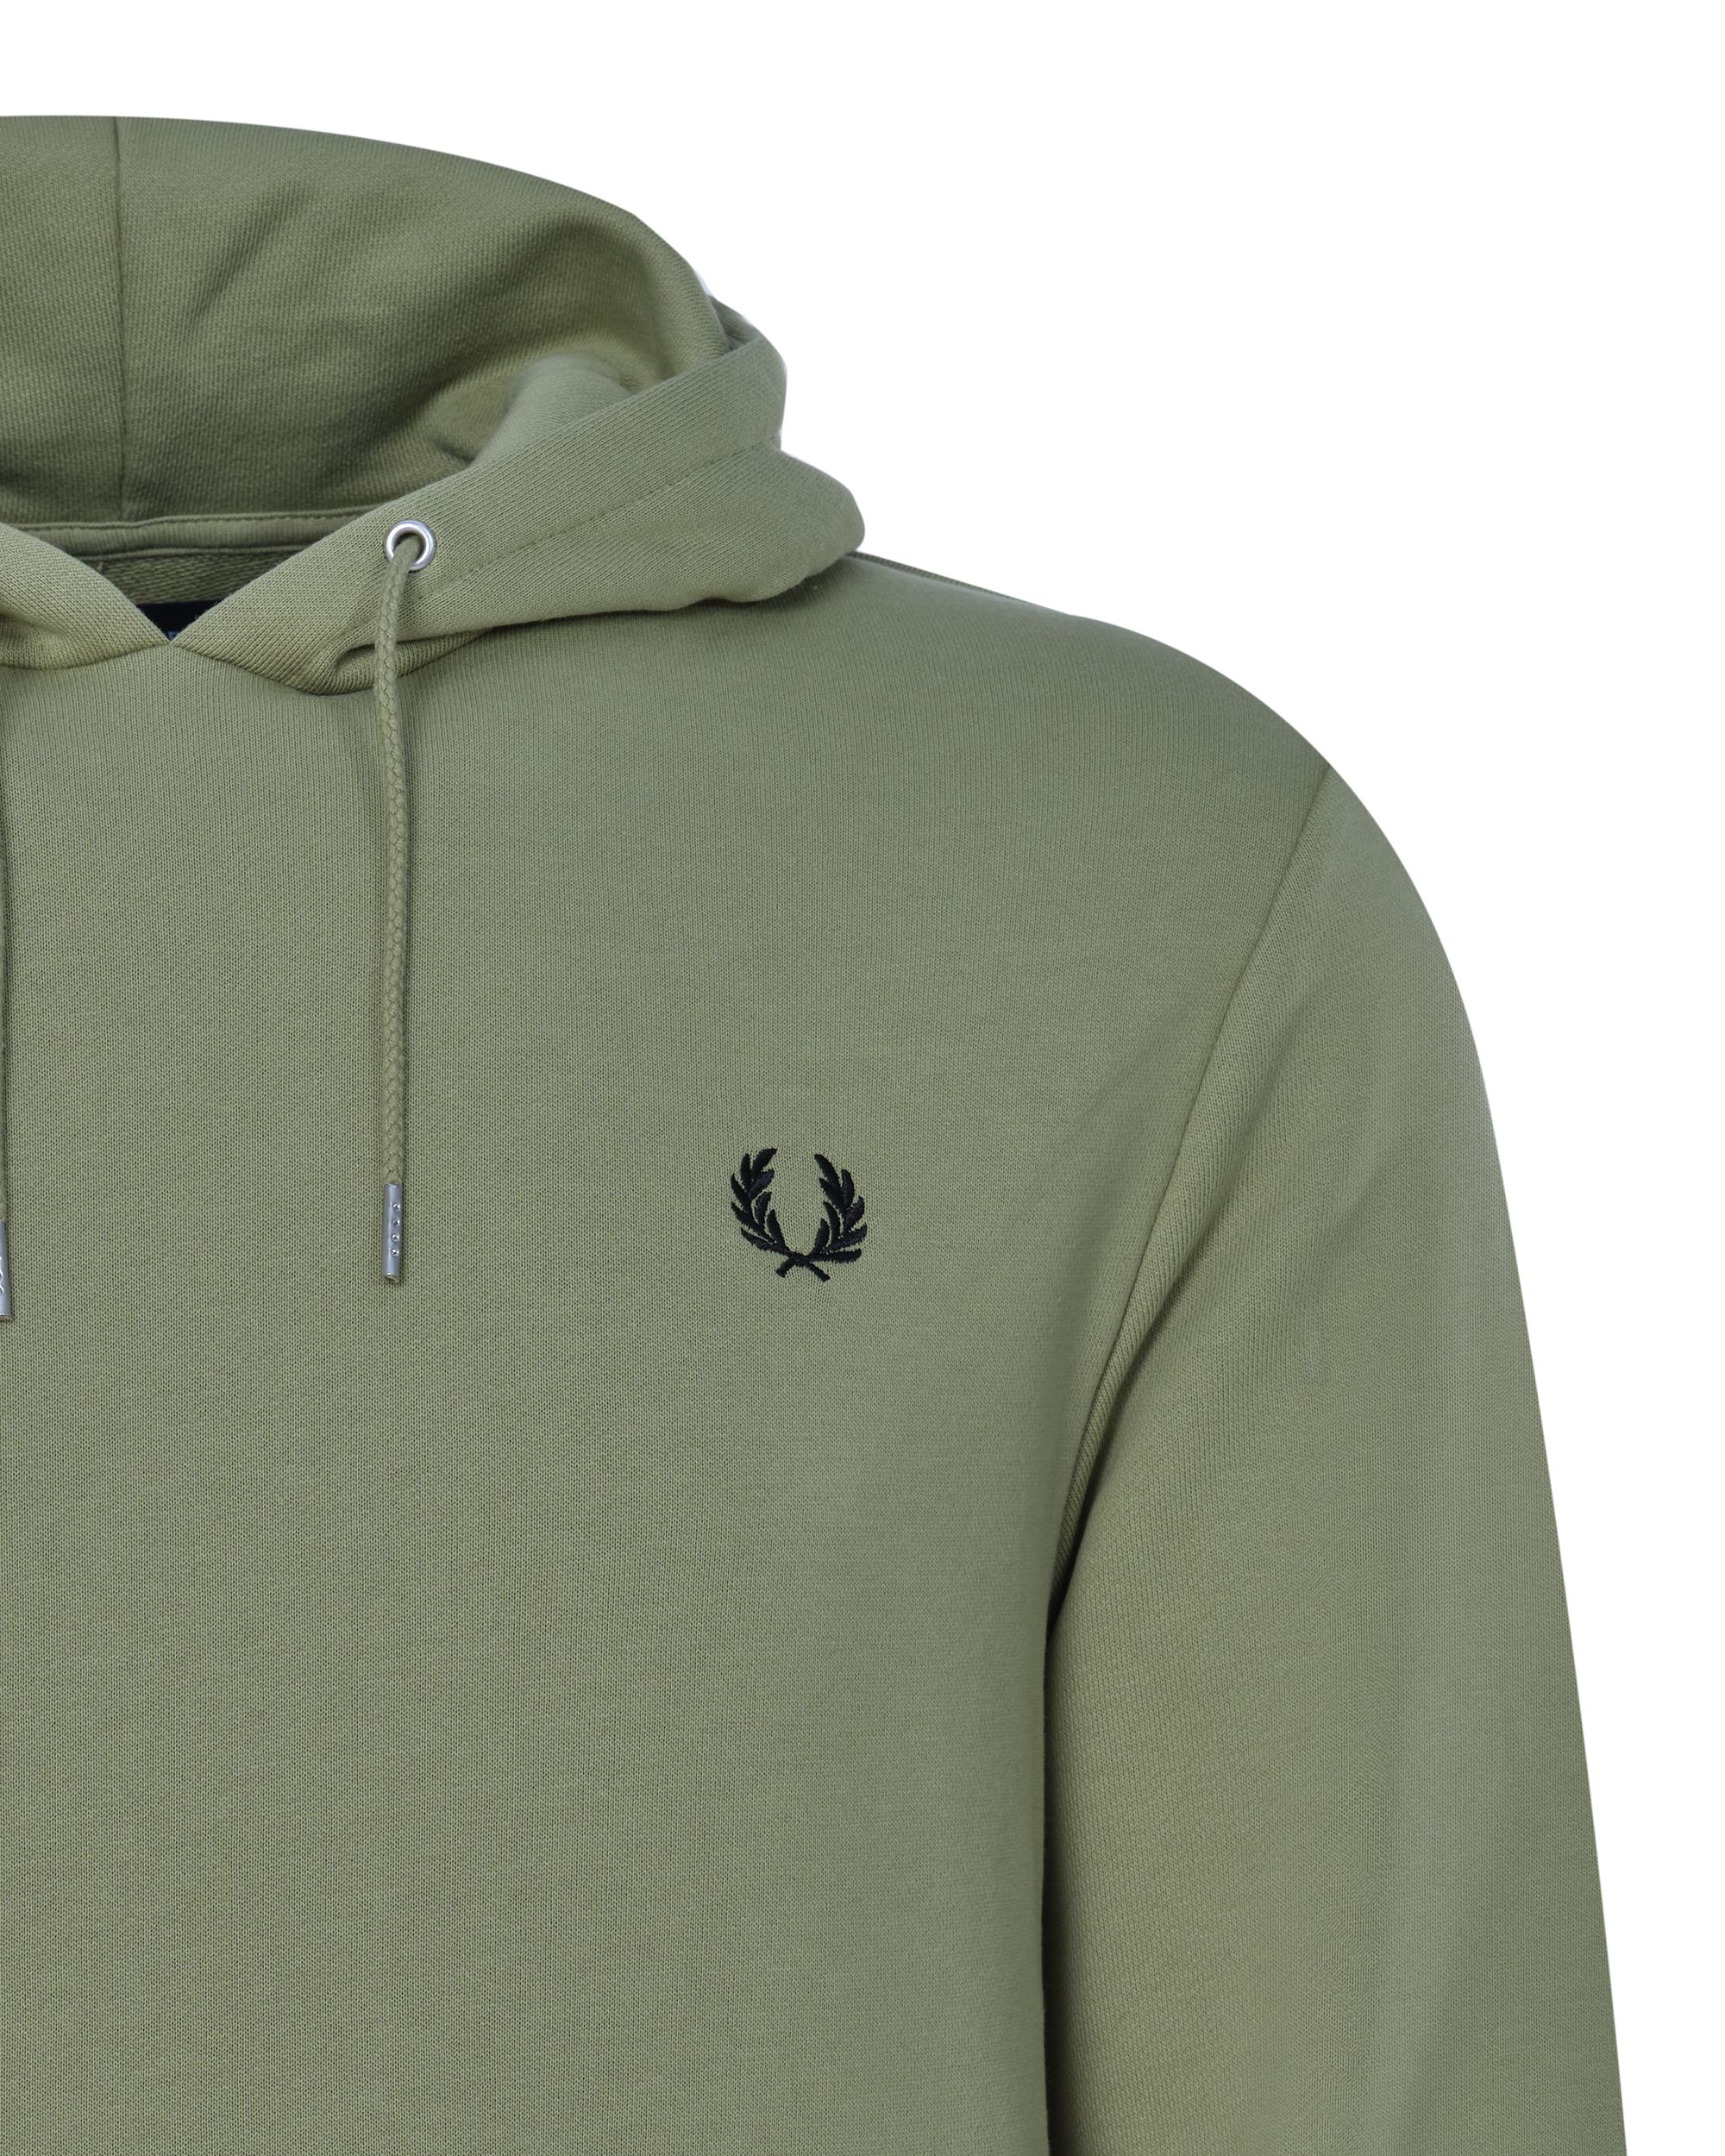 Fred Perry Tipped Hoodie Groen 078791-001-L